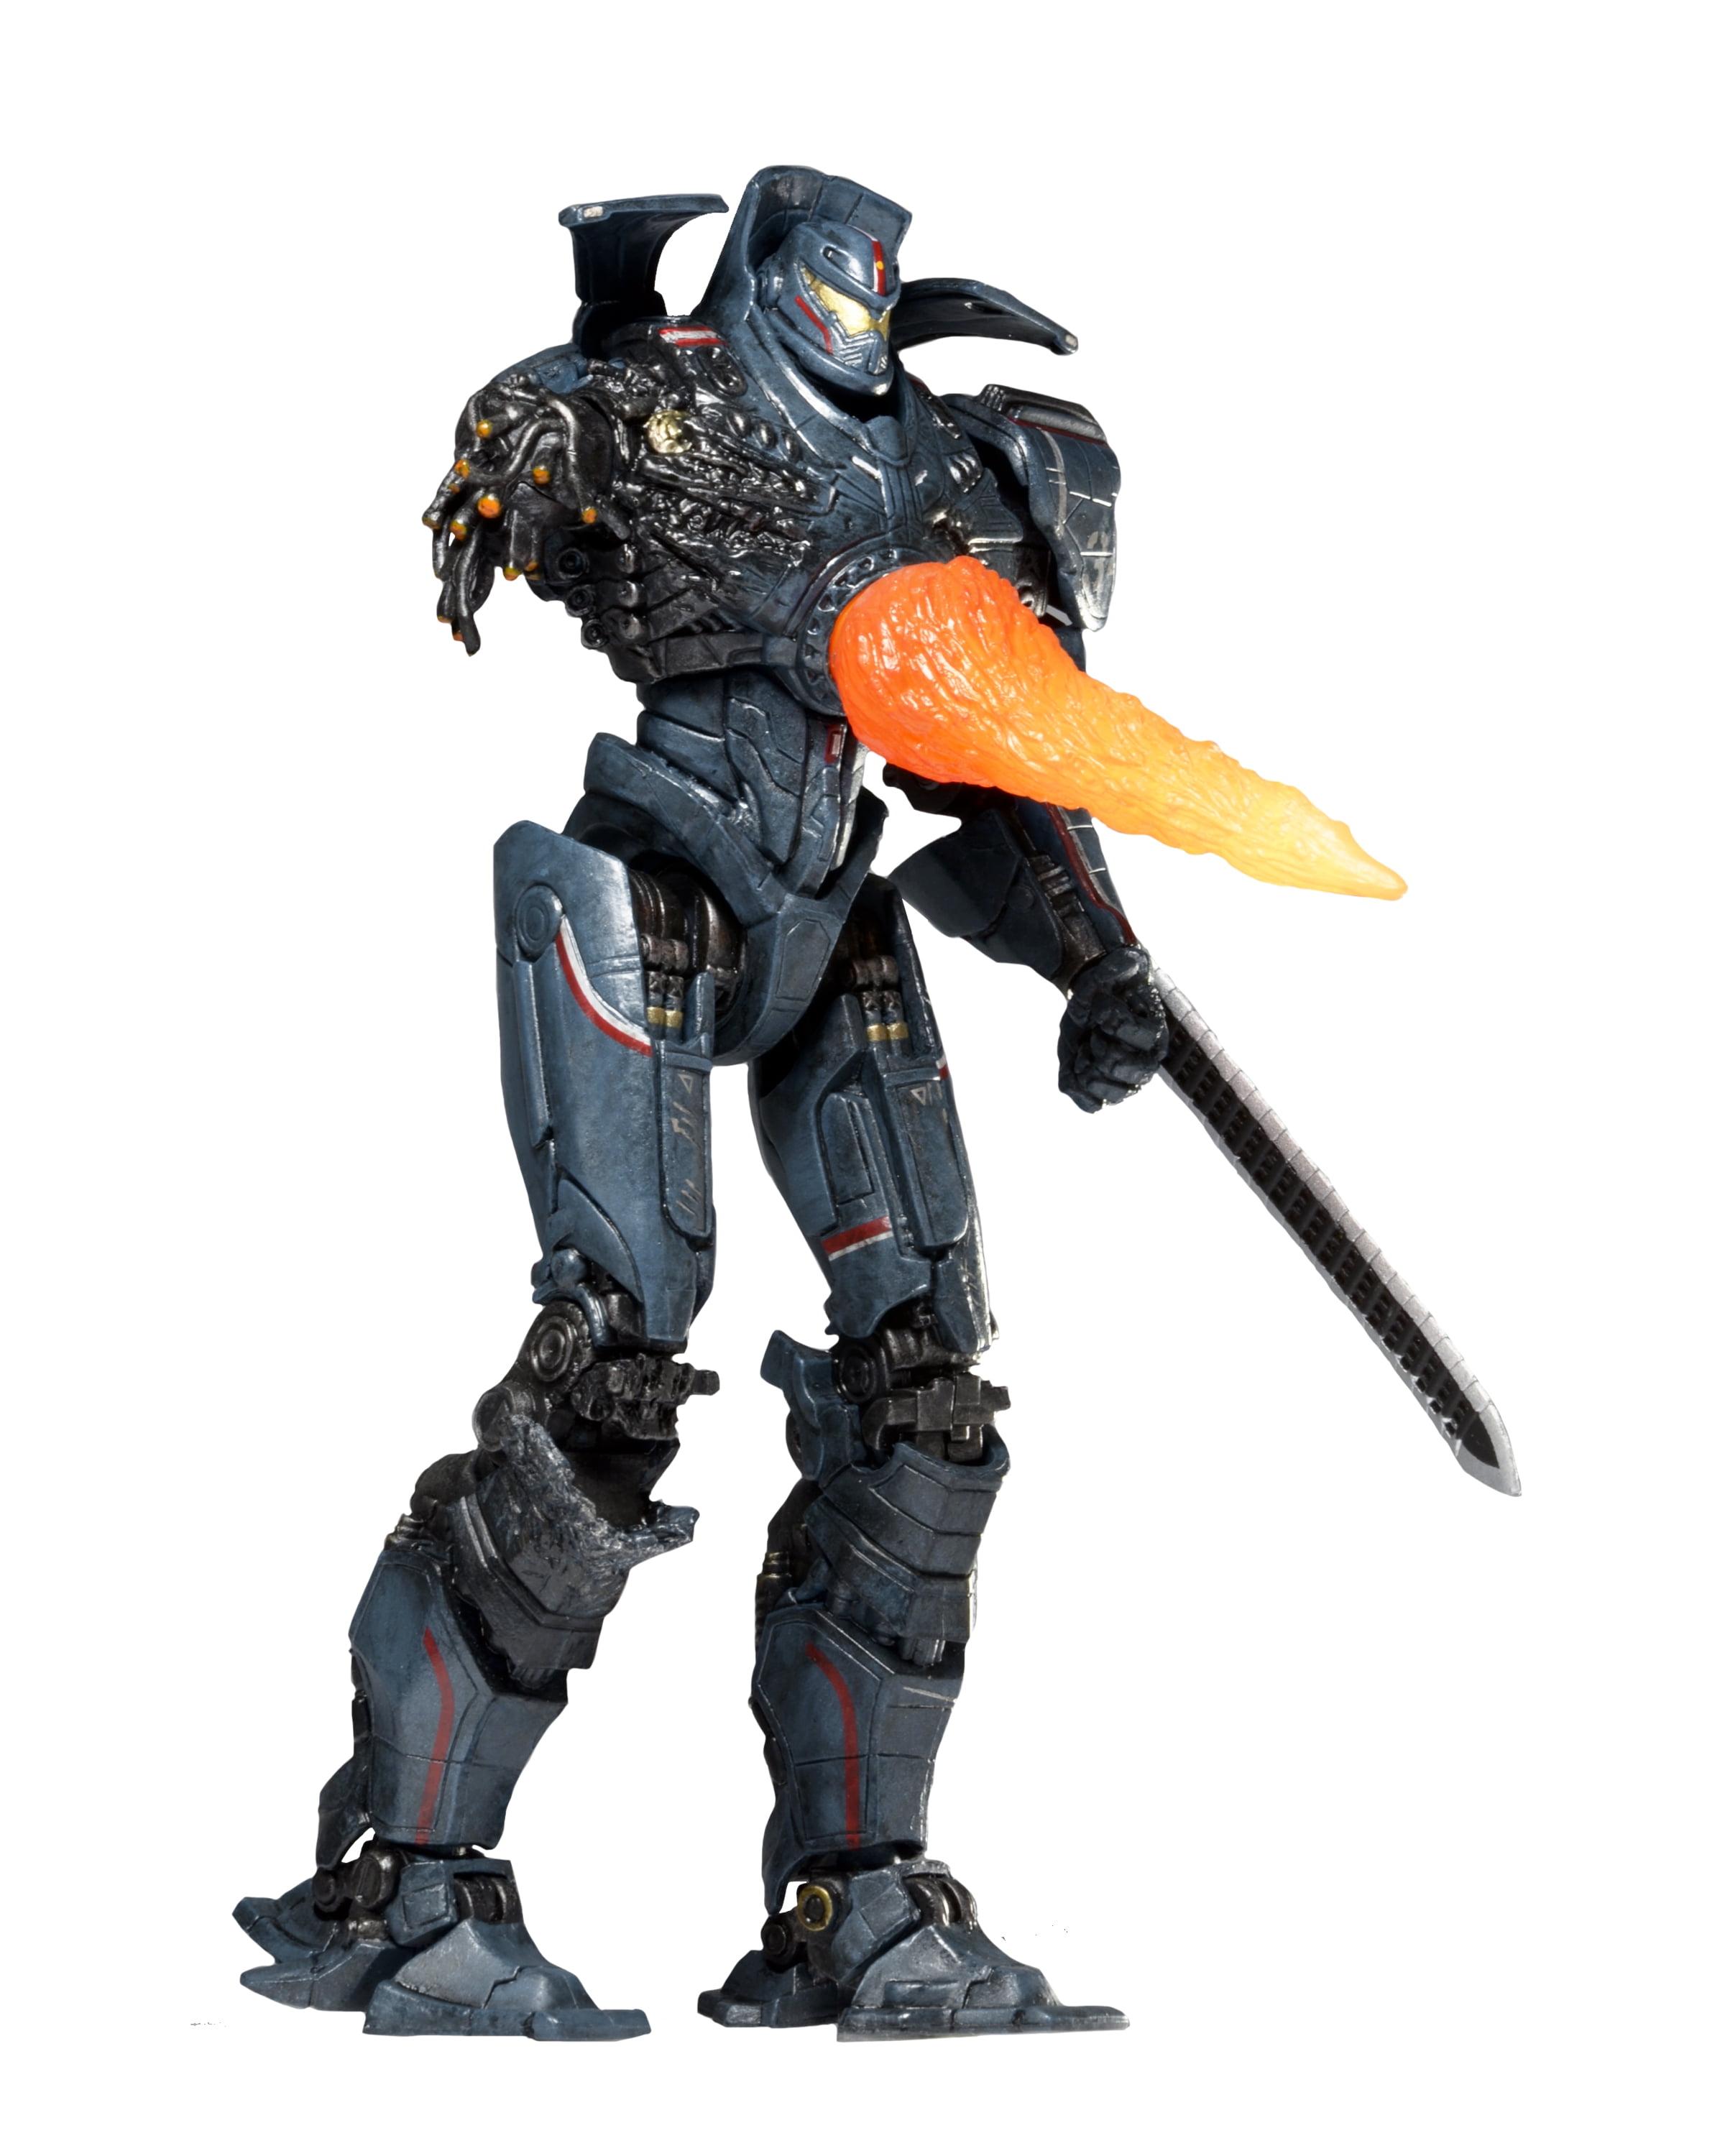 Pacific Rim Gypsy Danger figure 17.7 inch ABS free shipping w/tracking 